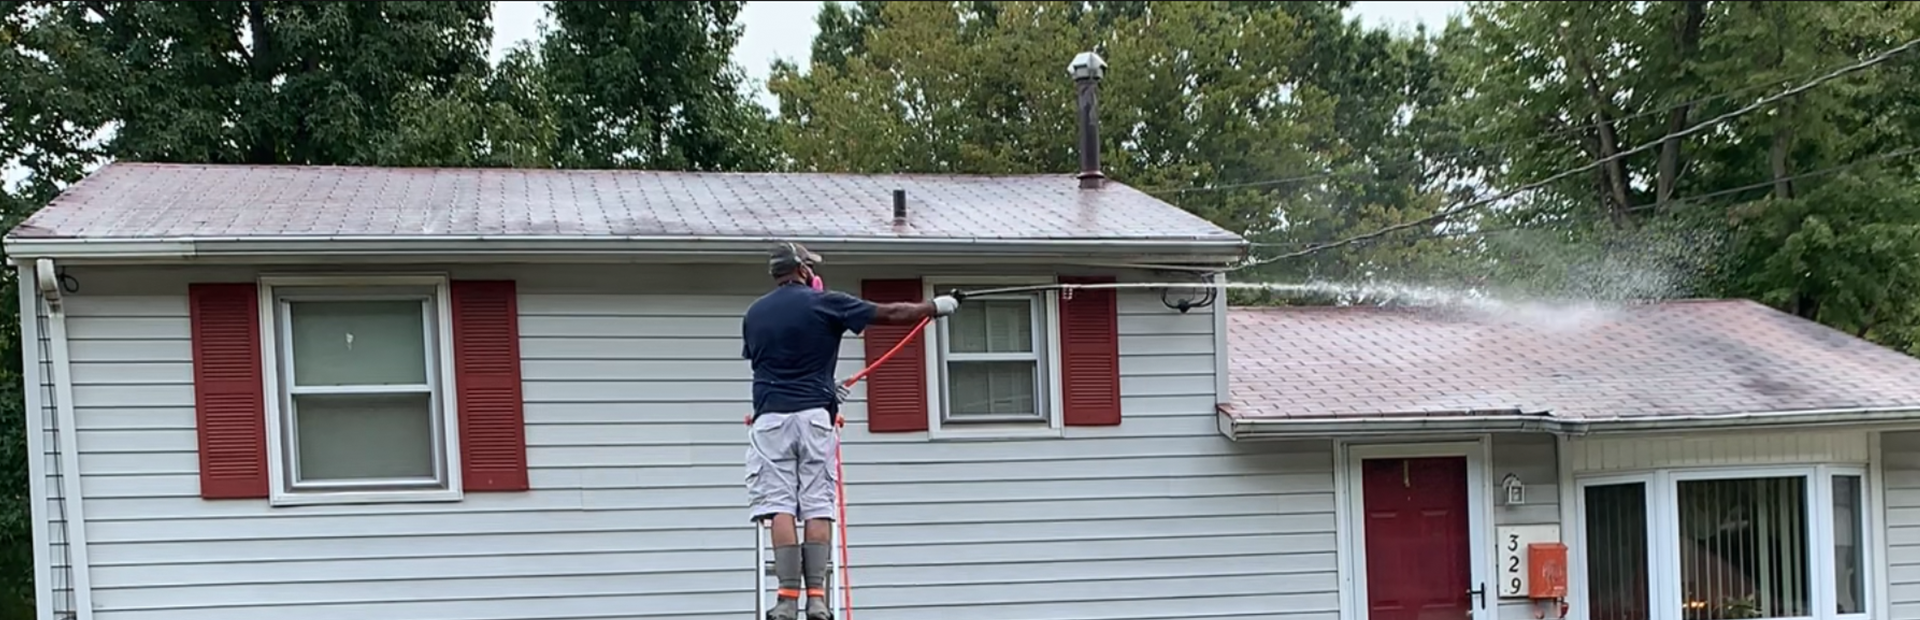 roof cleaning baltimore county maryland